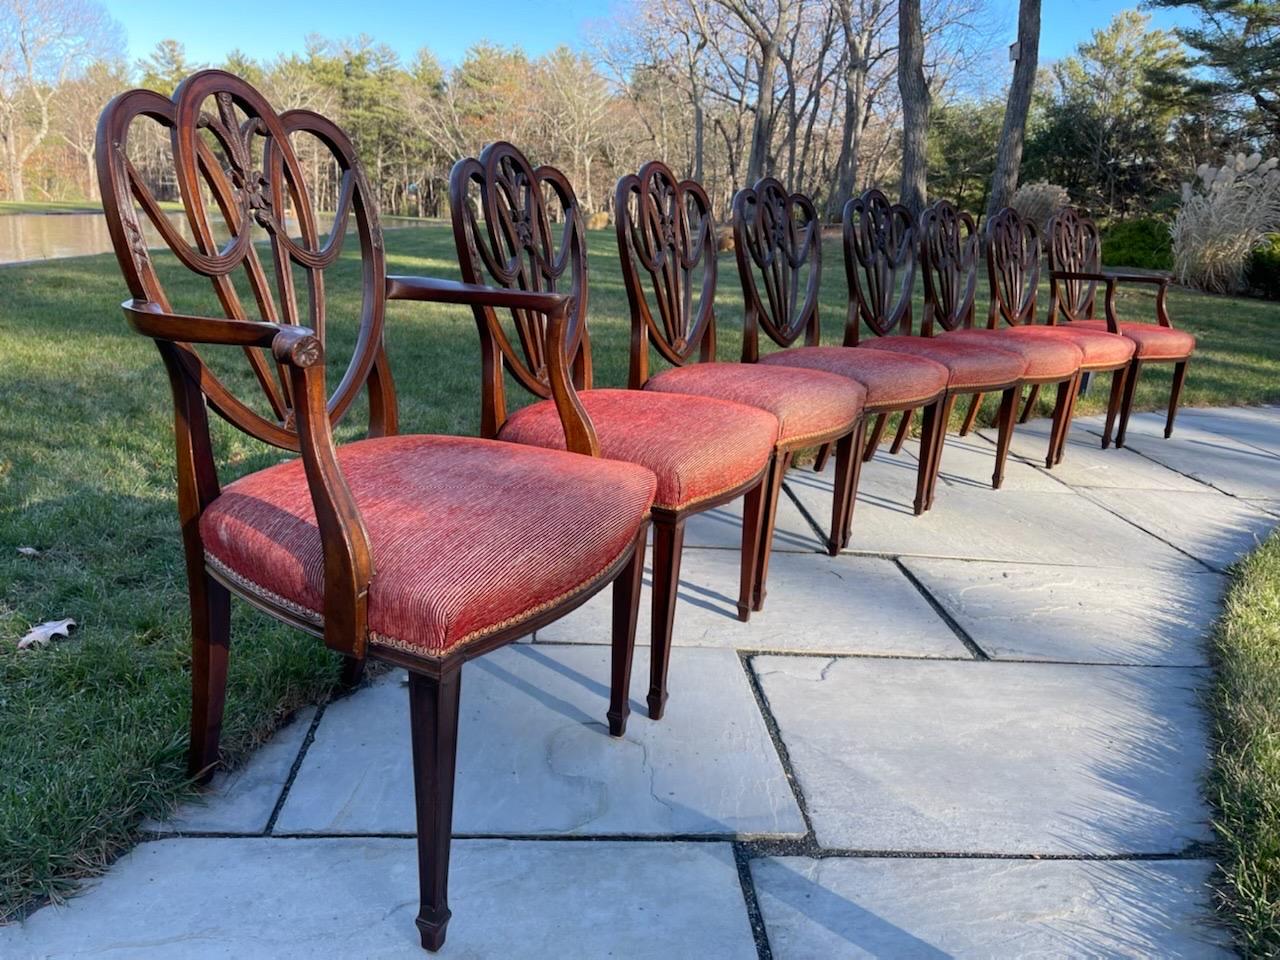 A superb set of eight English custom mahogany Hepplewhite style dining chairs. The heart shaped backs are finely hand carved with a Windsor feathers in the center and jabots connecting the vertical risers. The legs are tapered and end in spade feet.